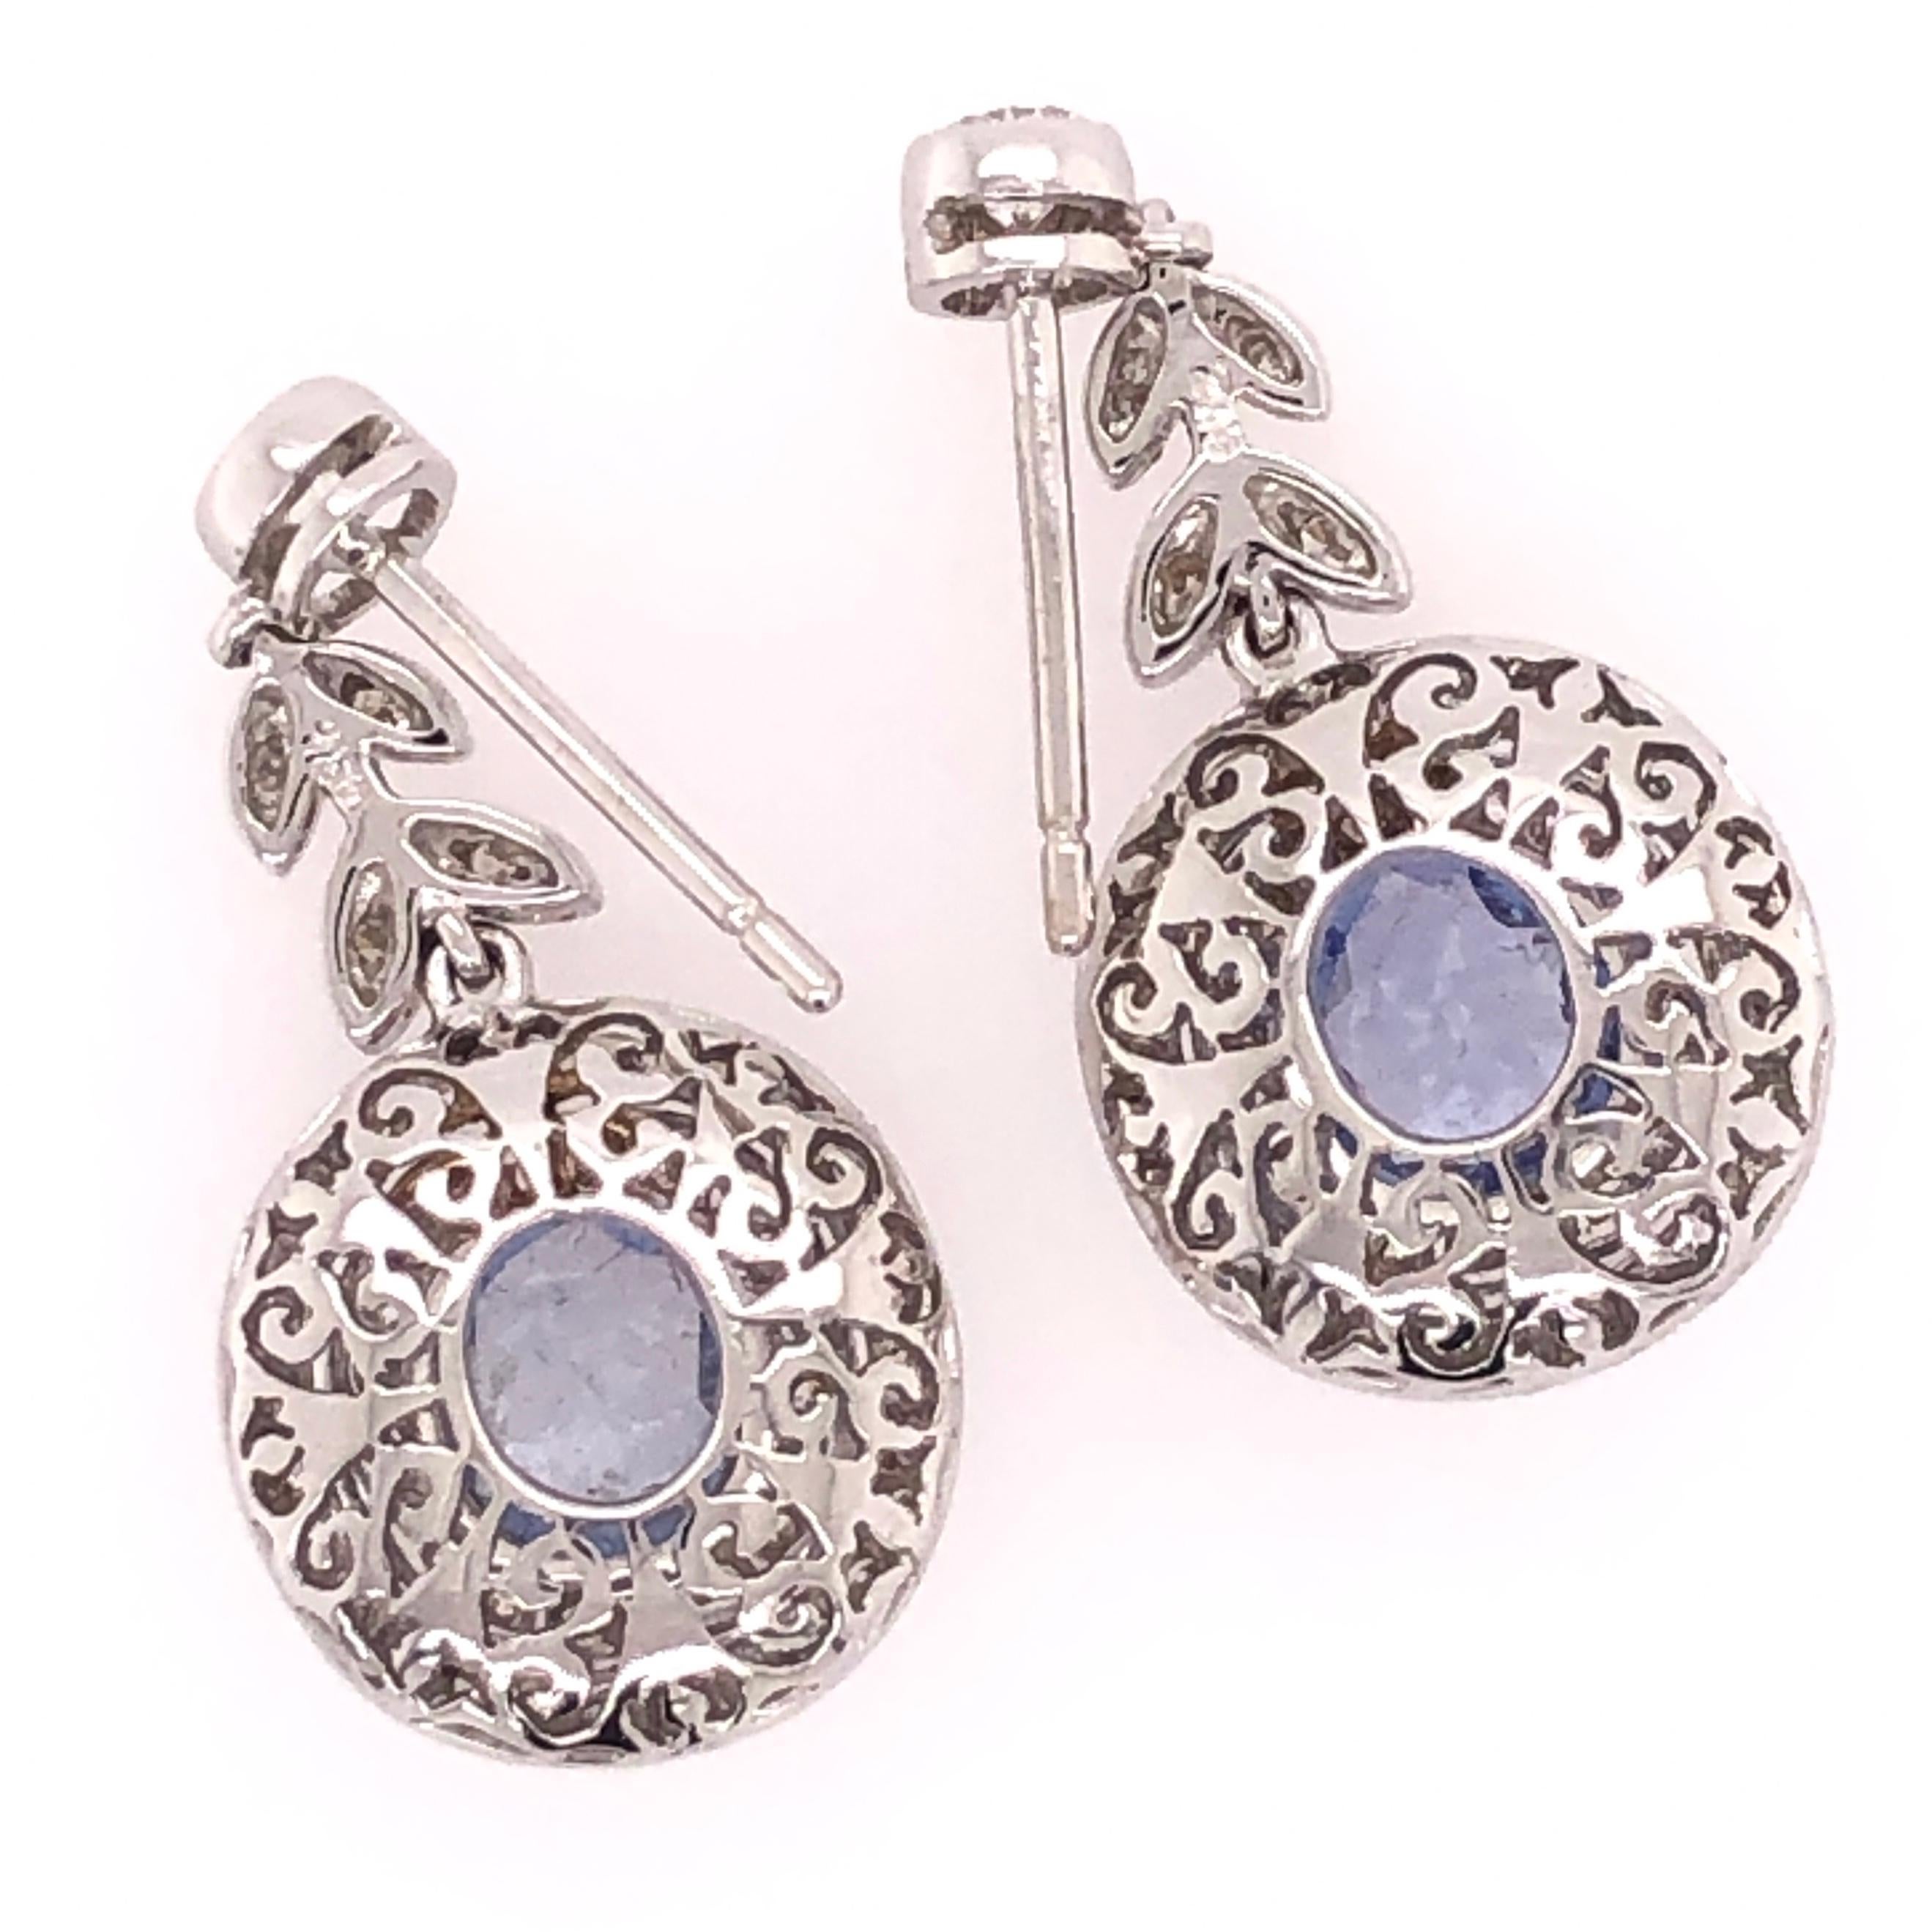 Simply Beautiful finely detailed Drop Earrings set with Cornflower Blue Sapphires, approx. total weight of the 2 Sapphires 2.08tcw surrounded by Diamonds, approx. 1.05tcw. Approx. 1.10